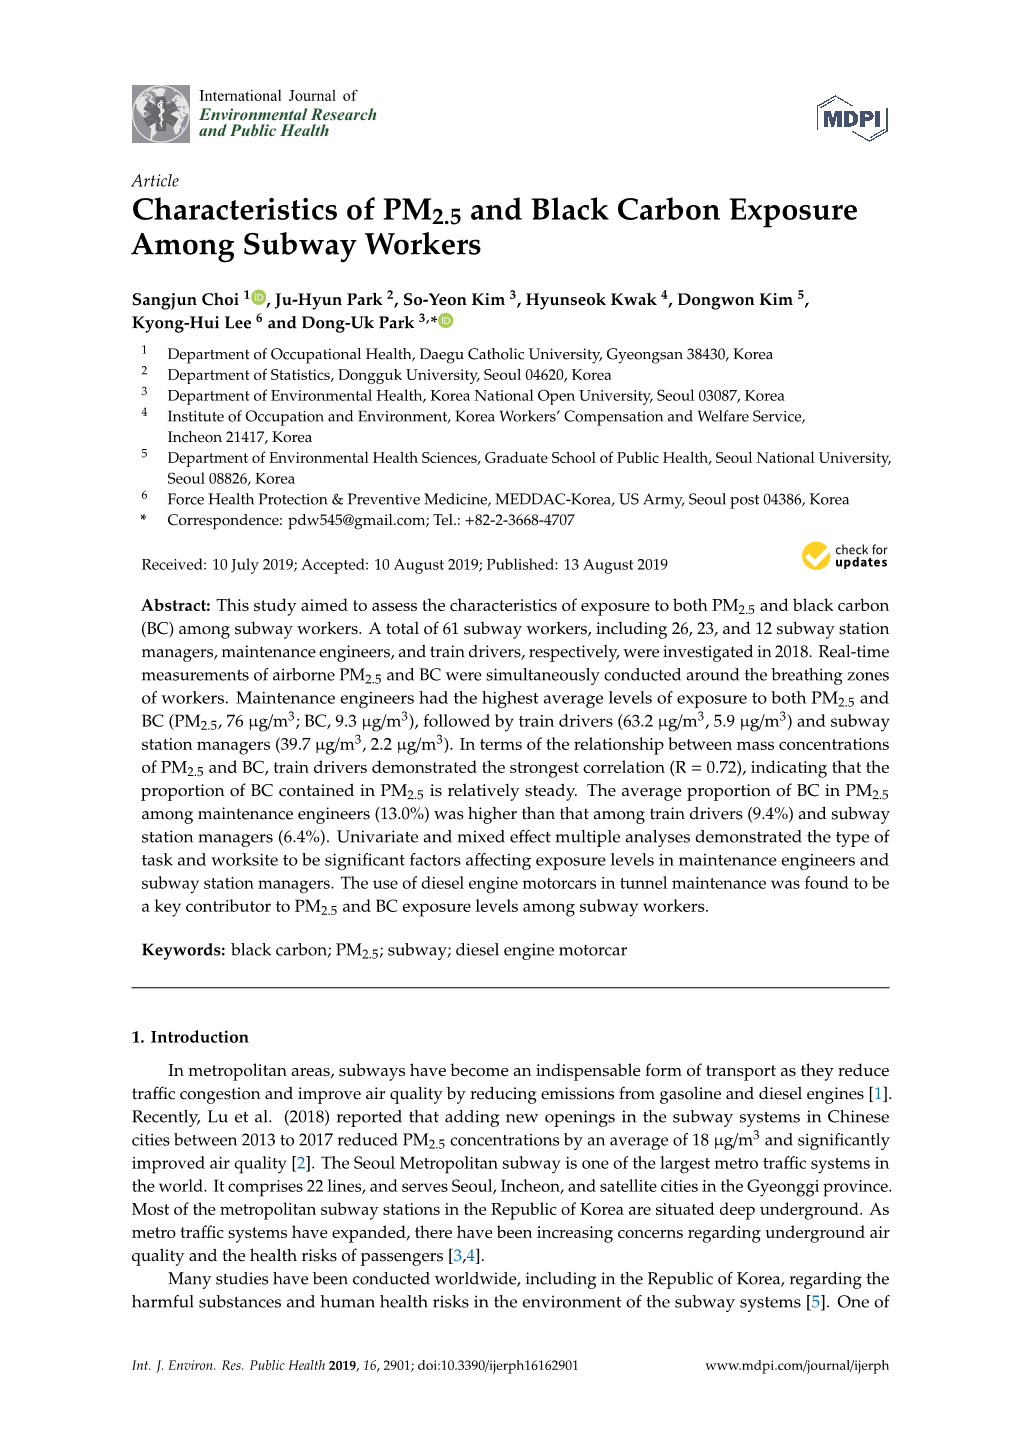 Characteristics of PM2.5 and Black Carbon Exposure Among Subway Workers